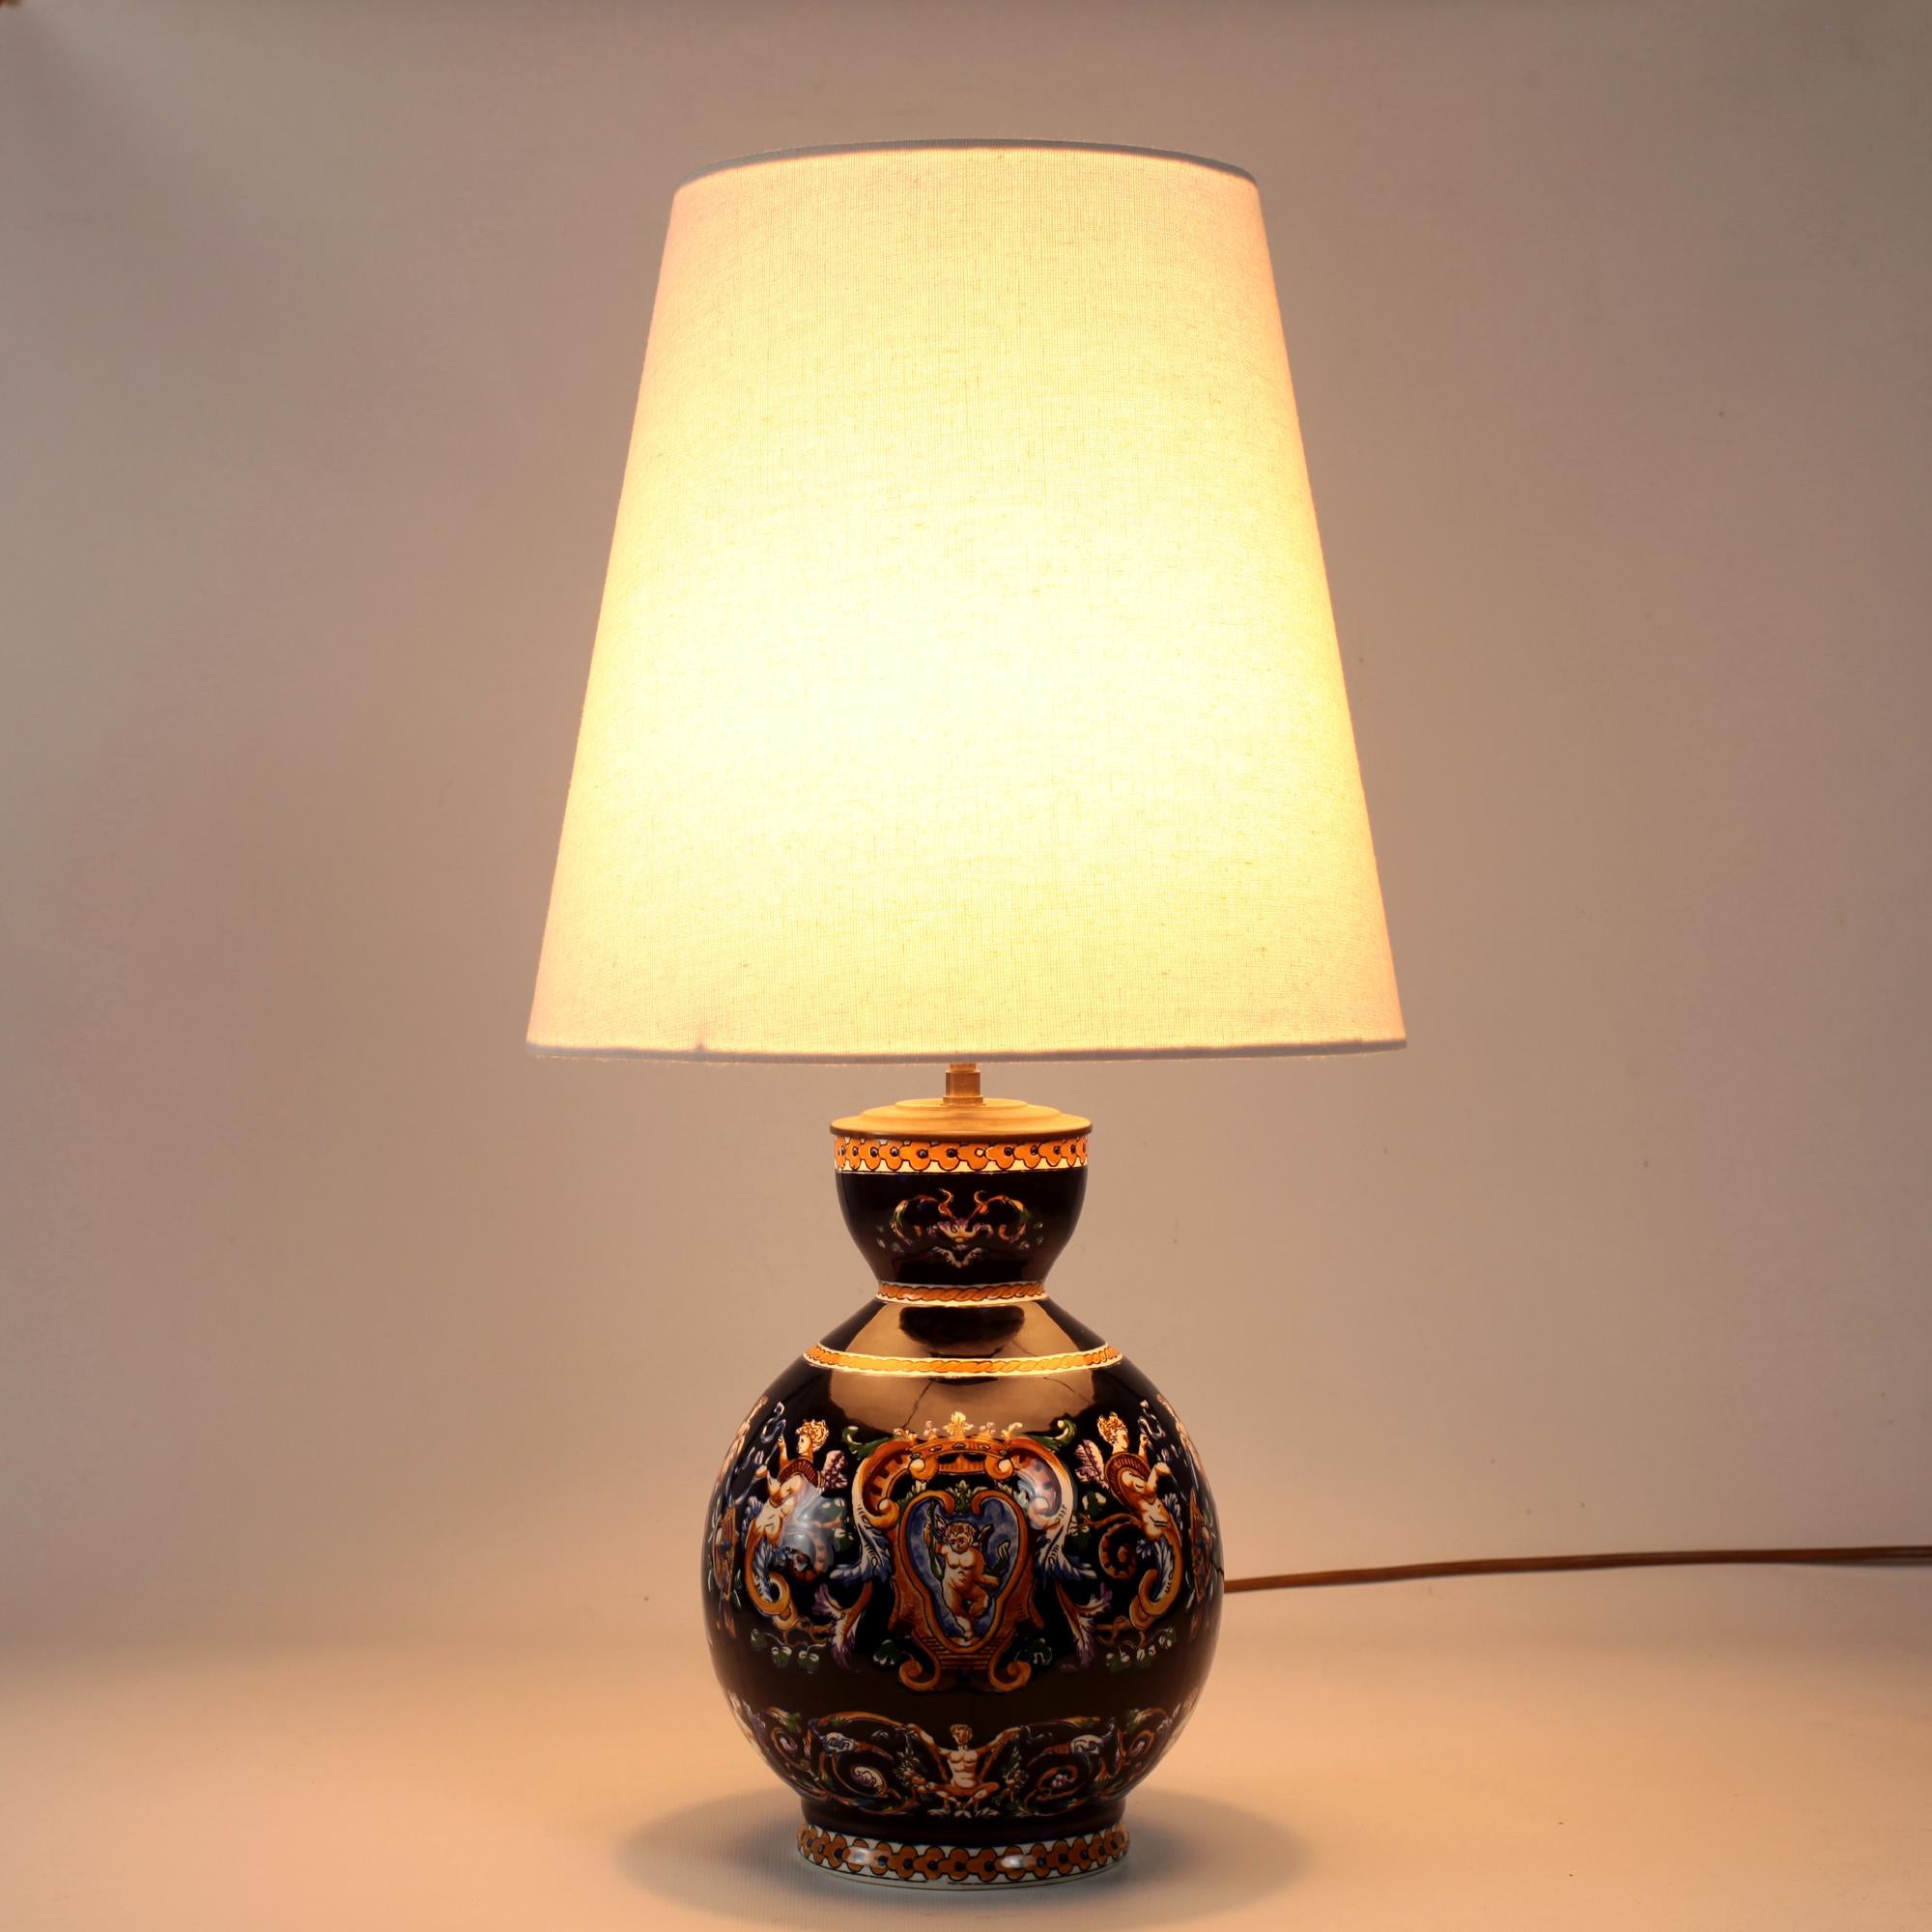 Elegant table lamp from Gien with cobalt blue background for hand painted Renaissance grotesque decorations inspired by fifteenth-century Italy.
The motifs in yellow, white and brown highlights depict chimeras, scrolls, bearded men, masks,